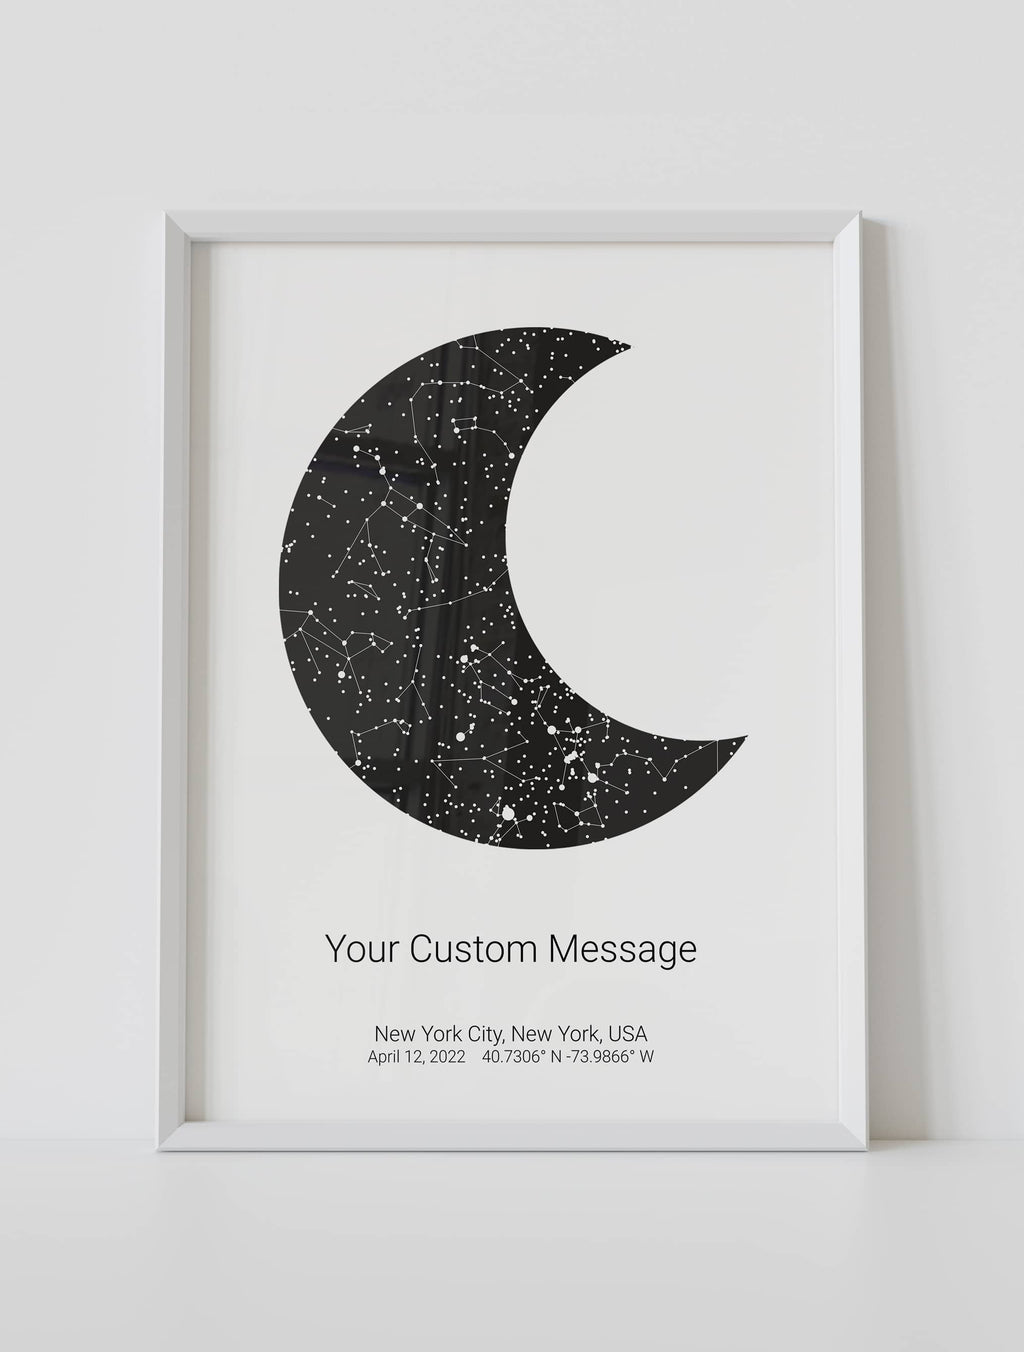 A framed moon star map poster featuring a specific date and location, with a personalized quote